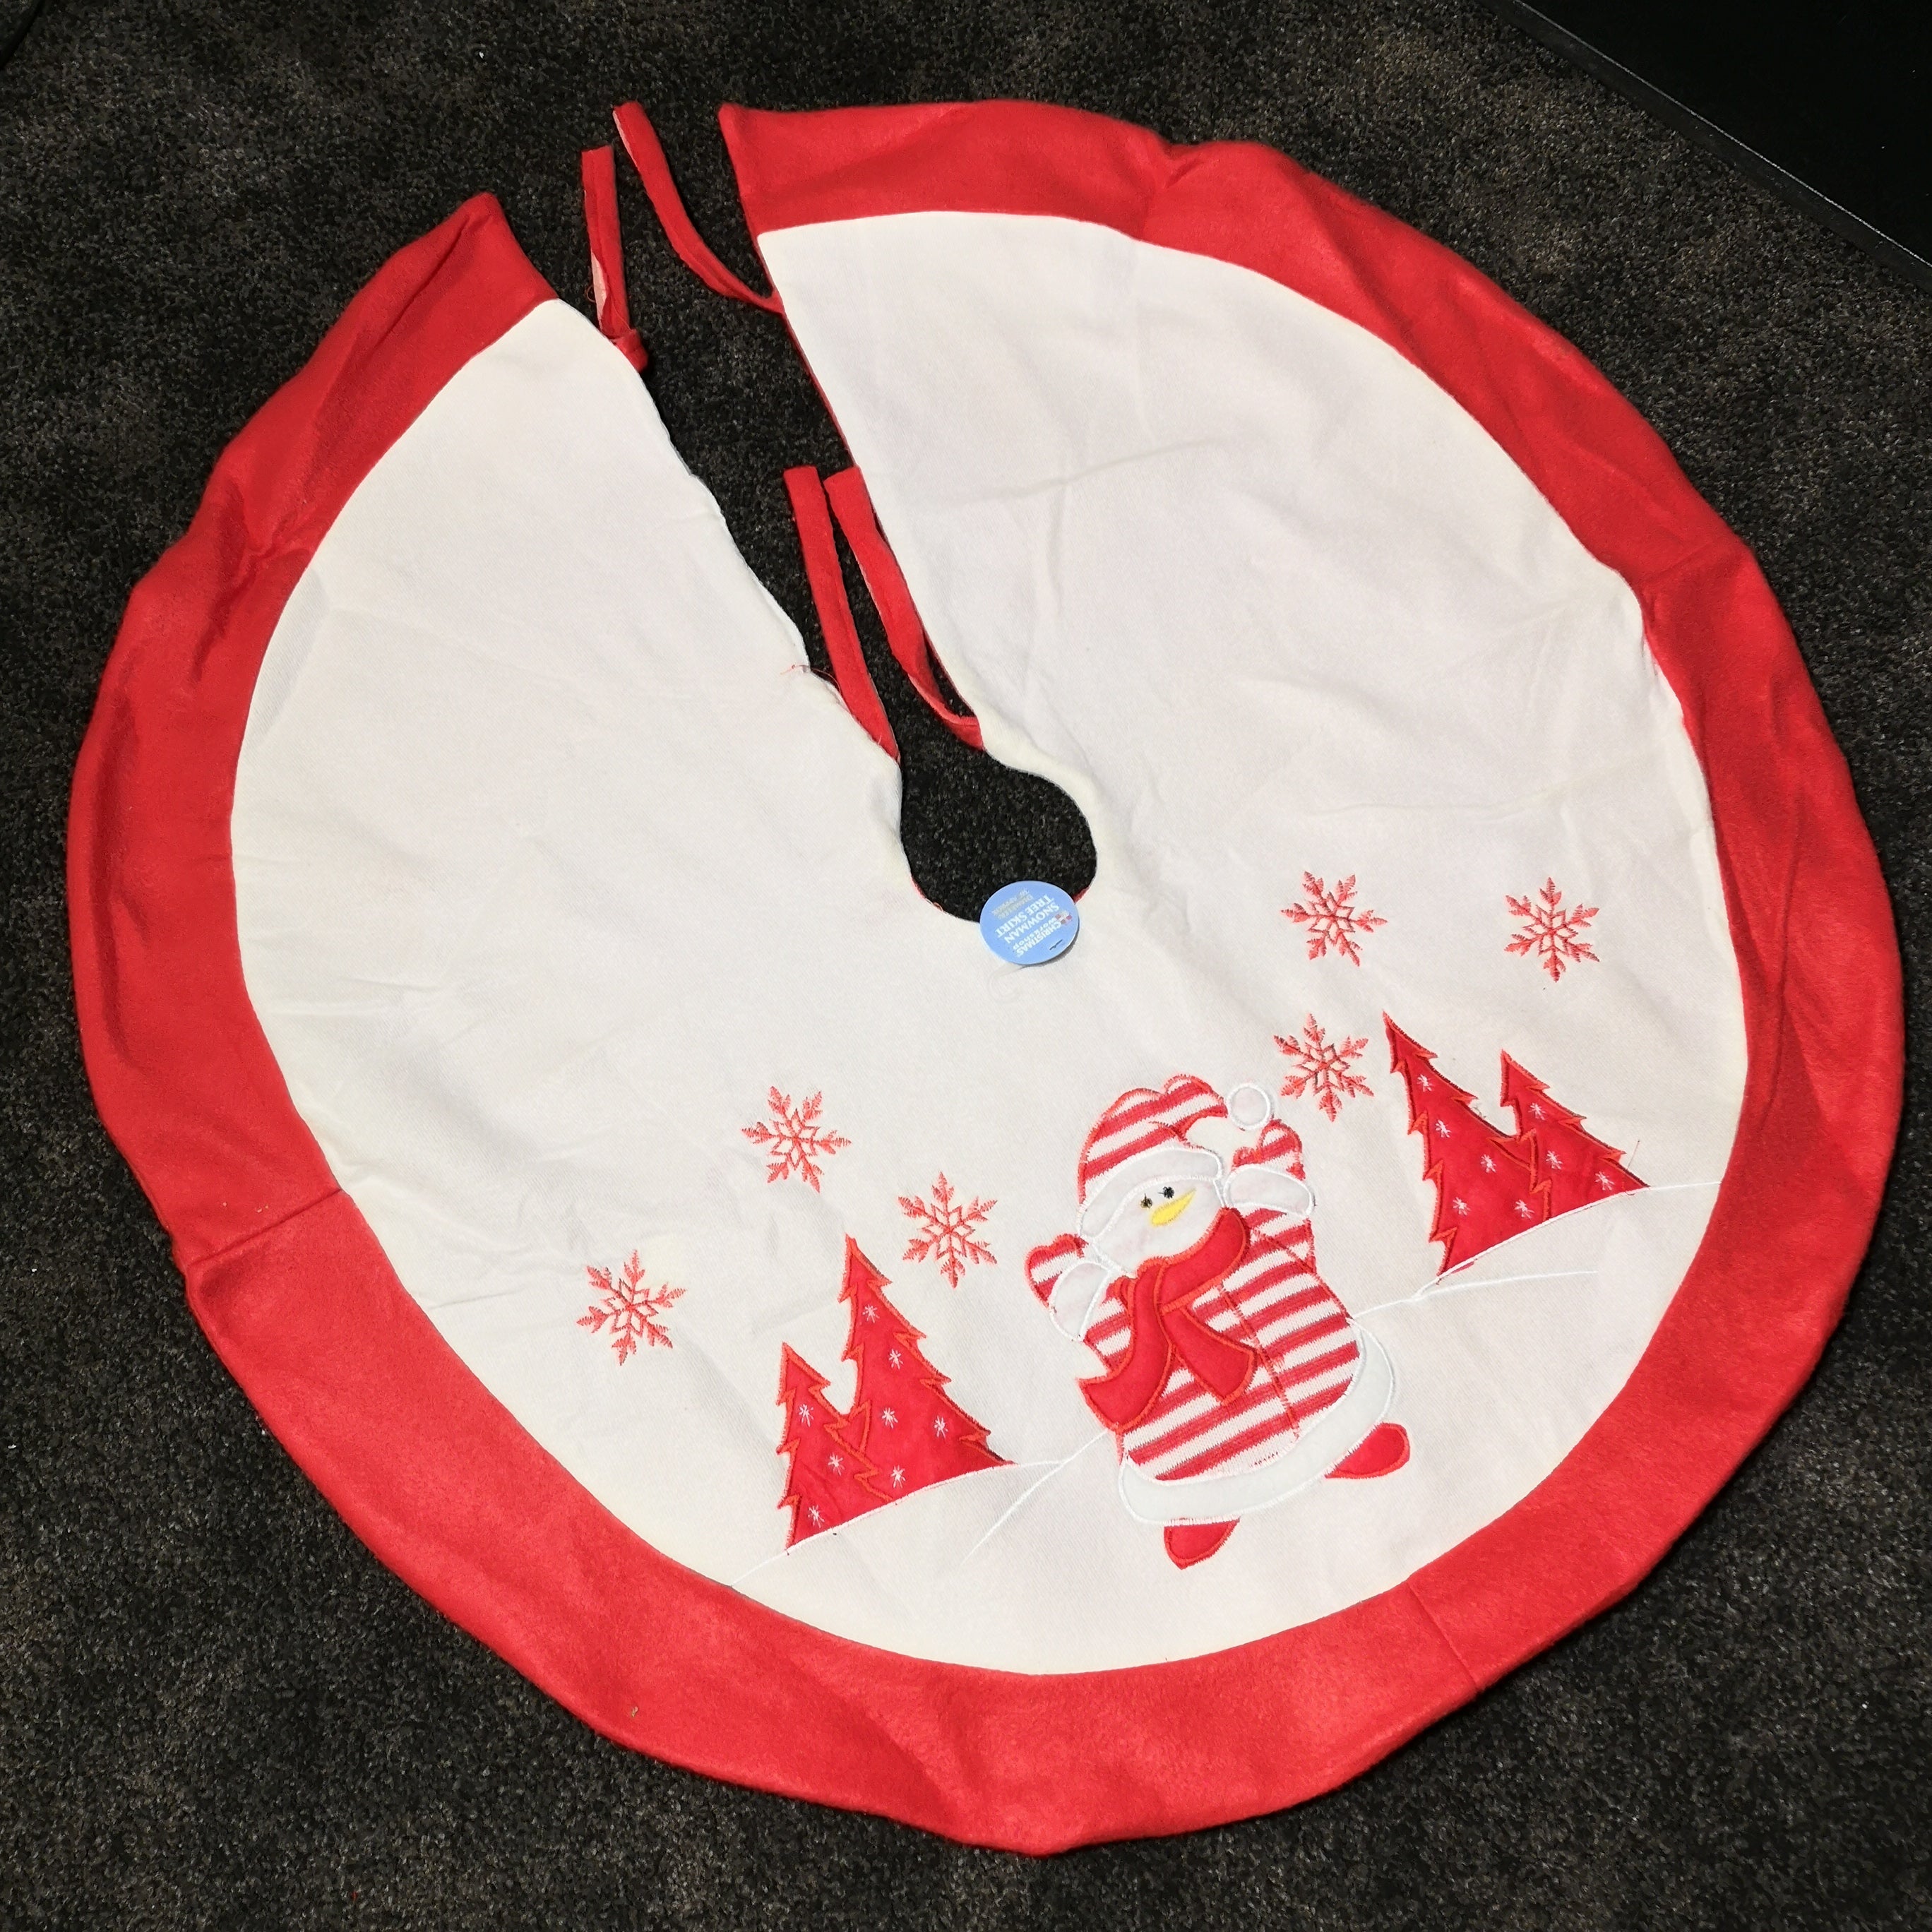 90cm Embroidered Snowman Winter Scene Fabric Christmas Tree Skirt in Red & White